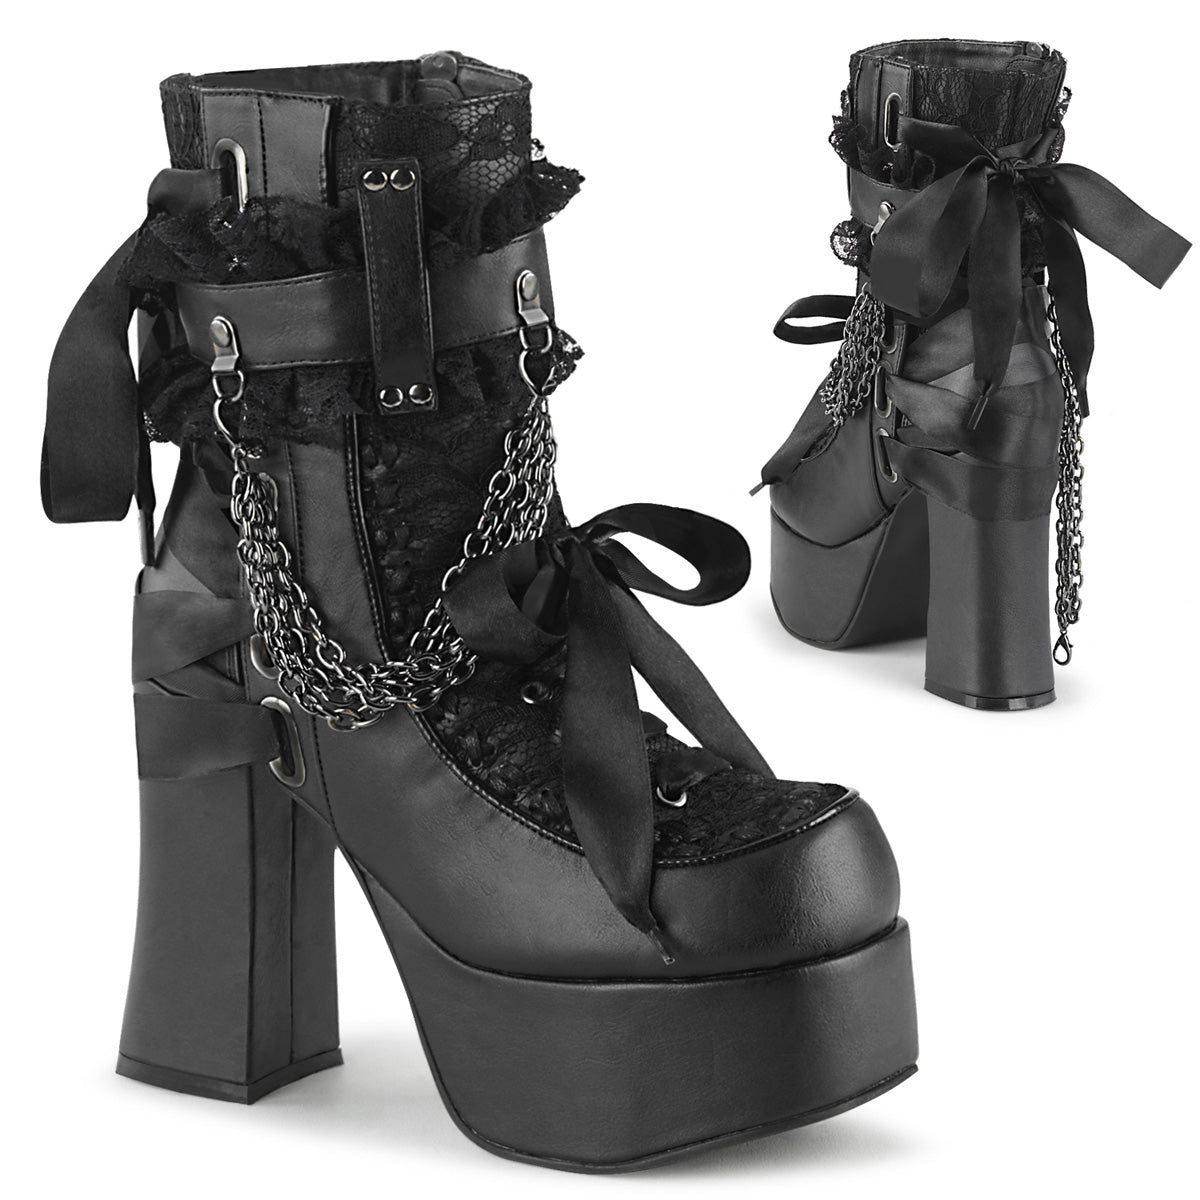 CHARADE-110 Alternative Footwear Demonia Women's Ankle Boots Blk Vegan Leather-Lace Overlay